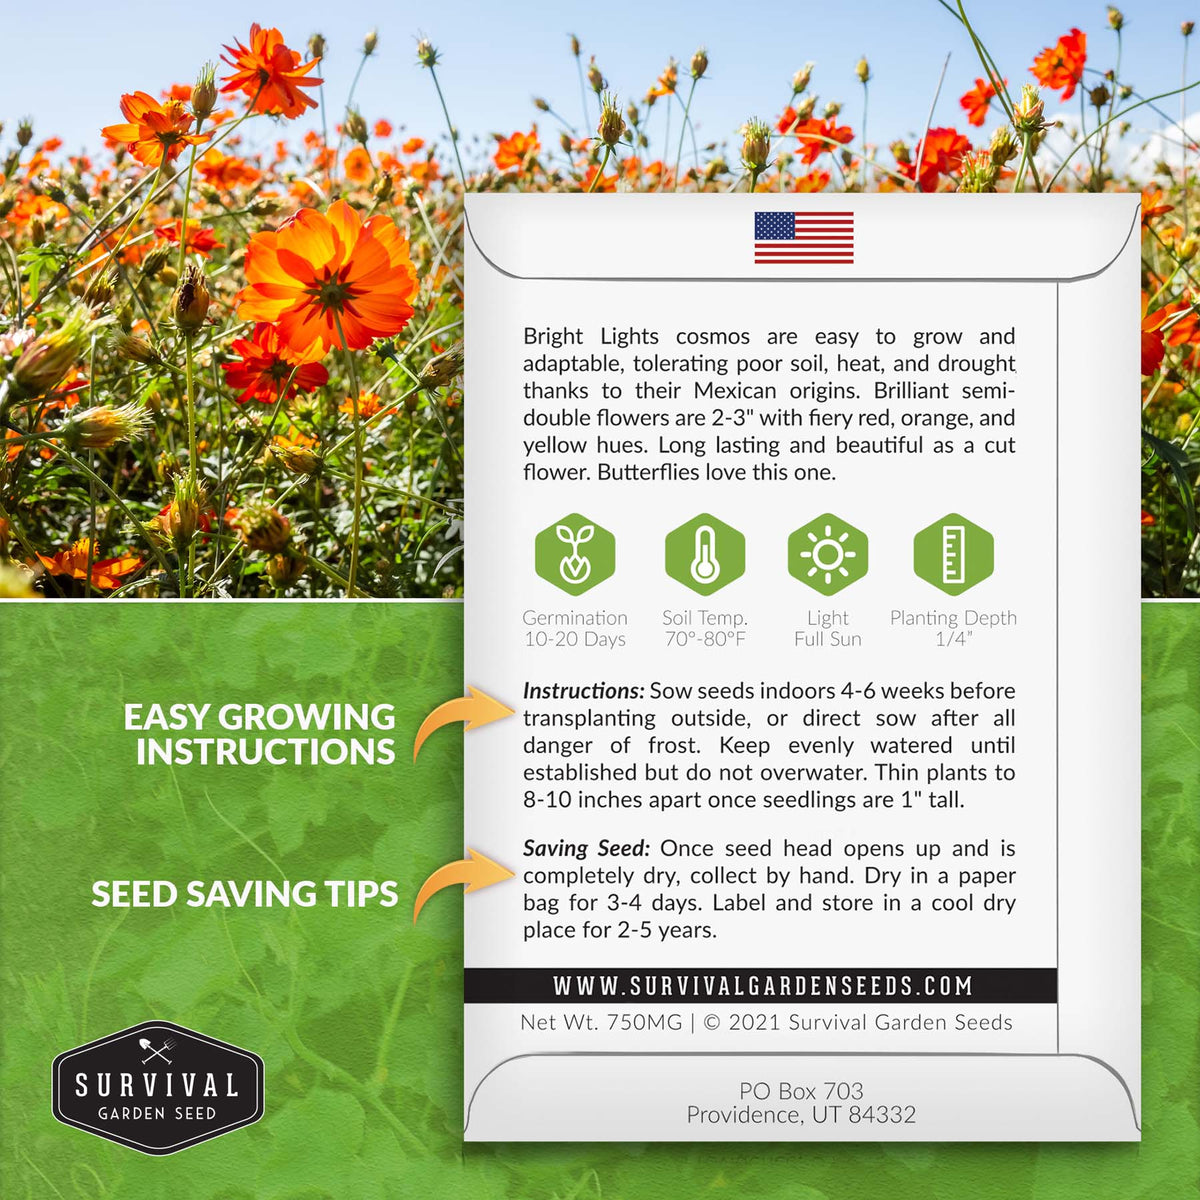 Bright Lights Cosmos seed planting instructions